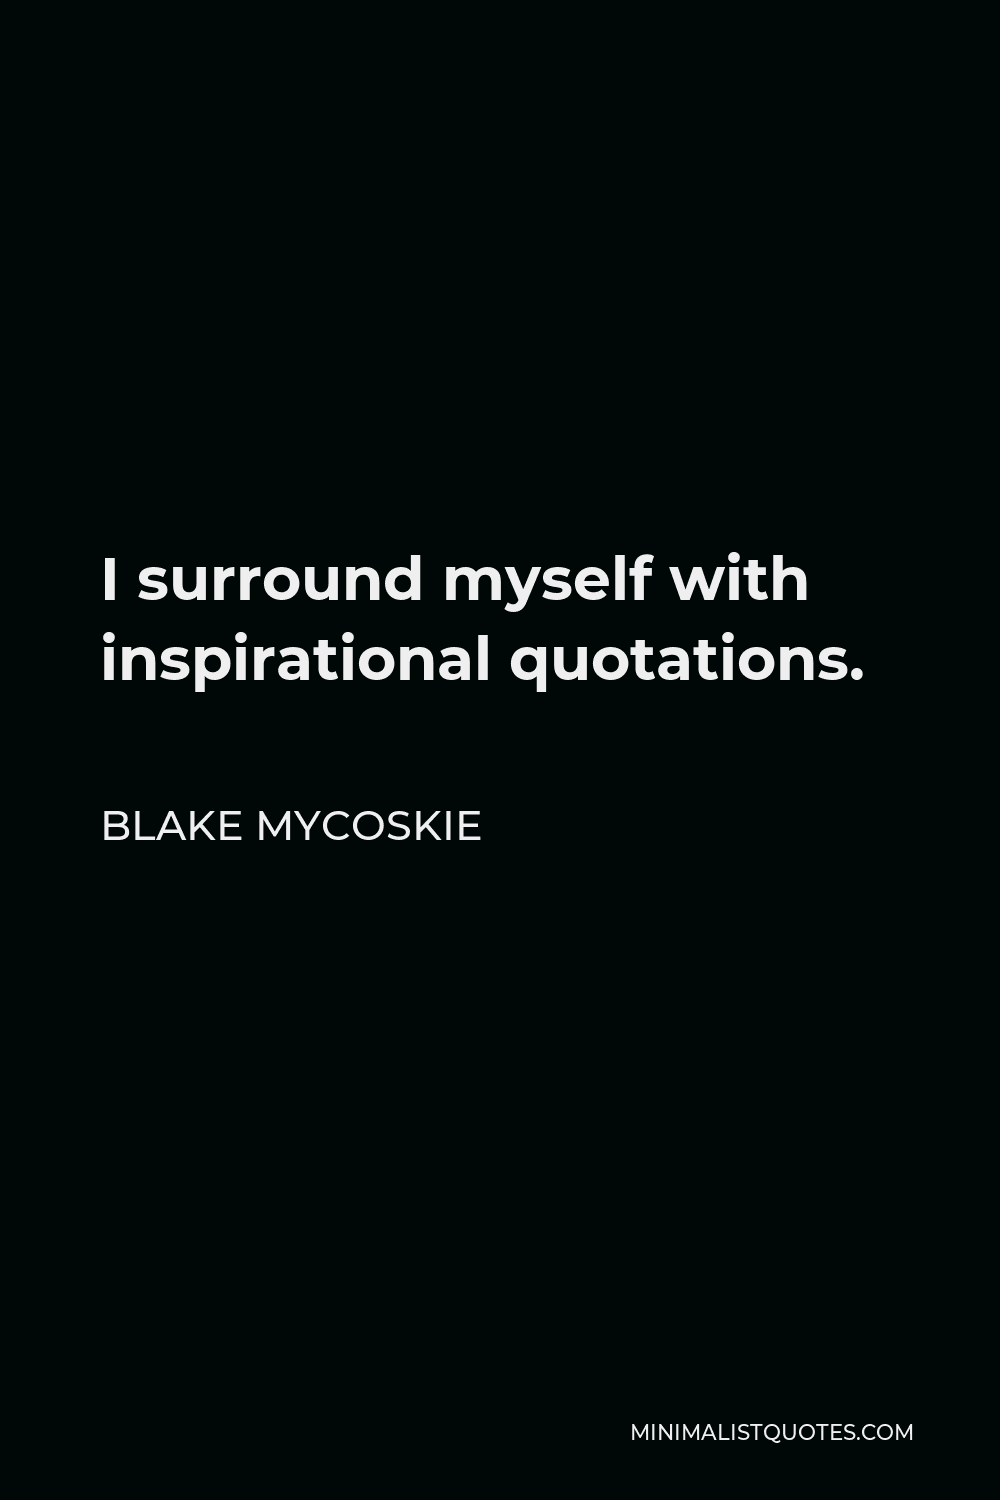 Blake Mycoskie Quote - I surround myself with inspirational quotations.